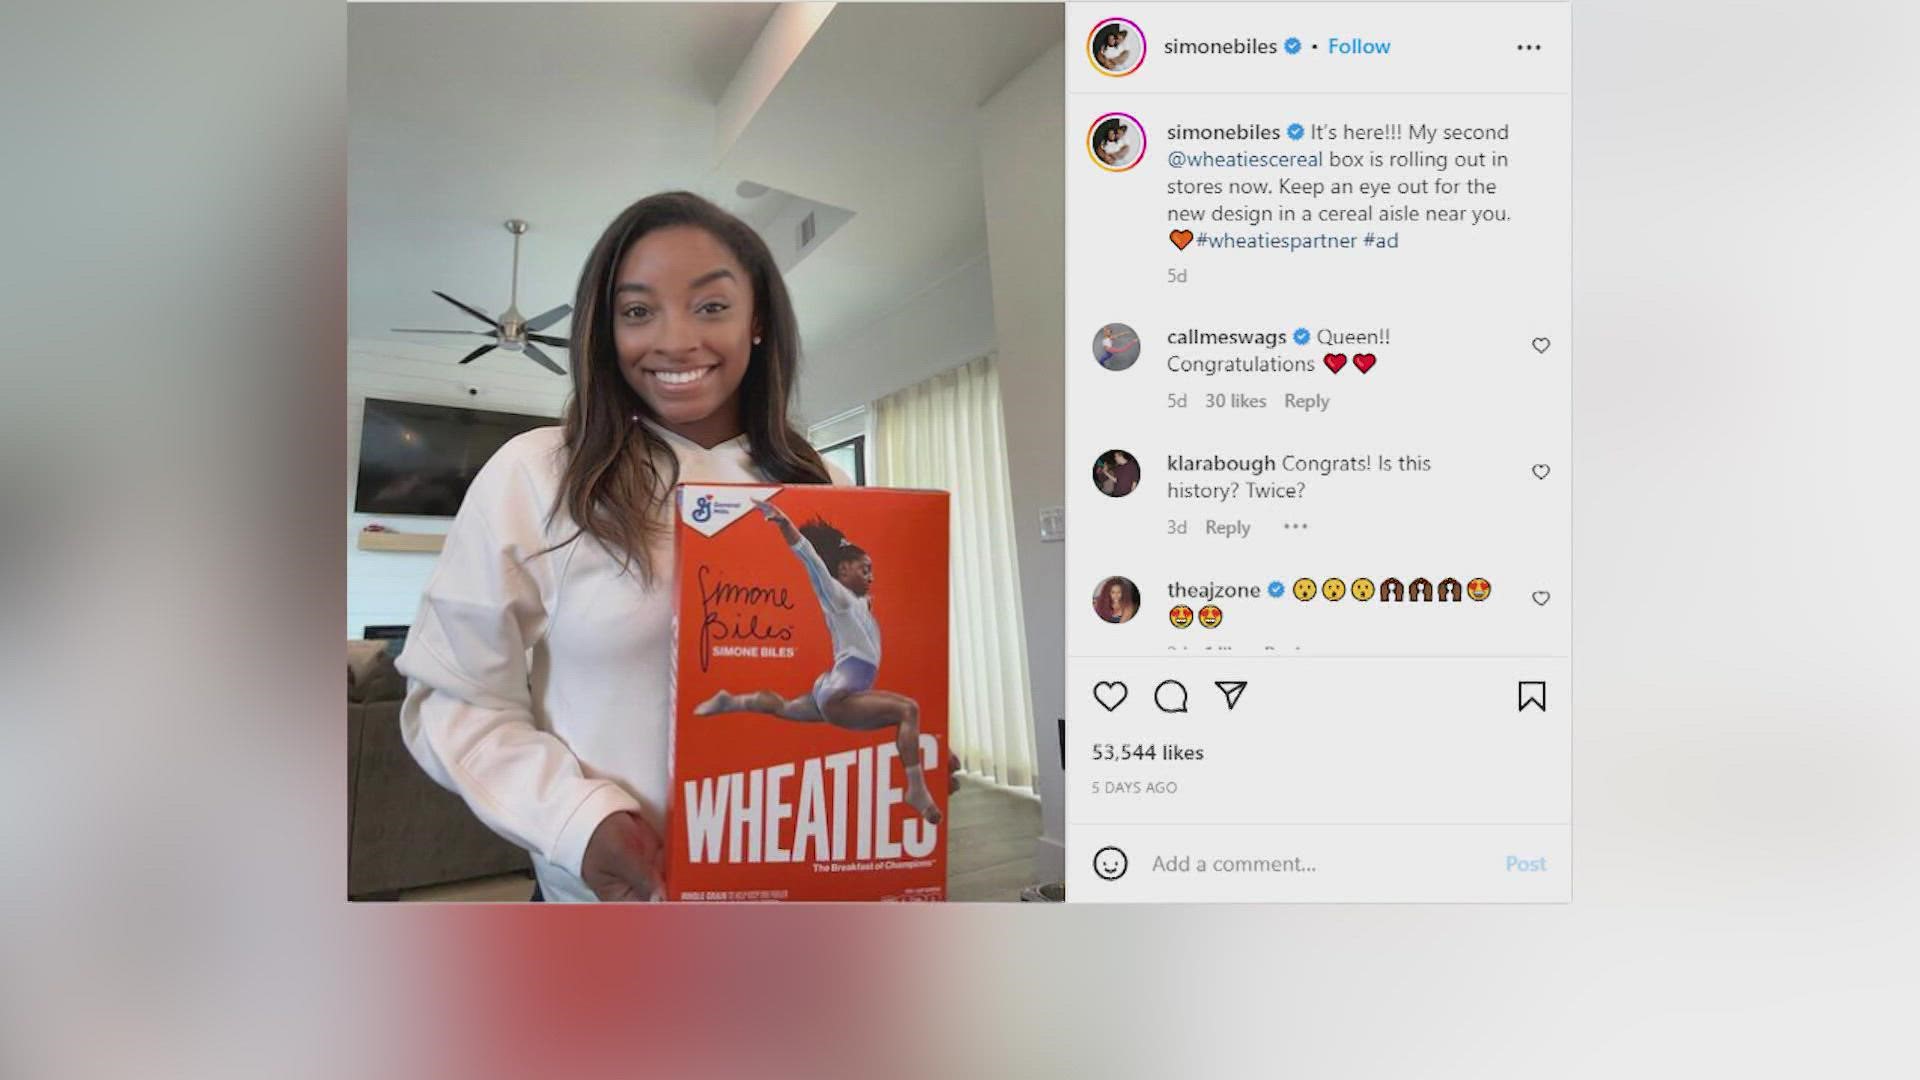 It's not Biles' first appearance on the iconic Wheaties box.